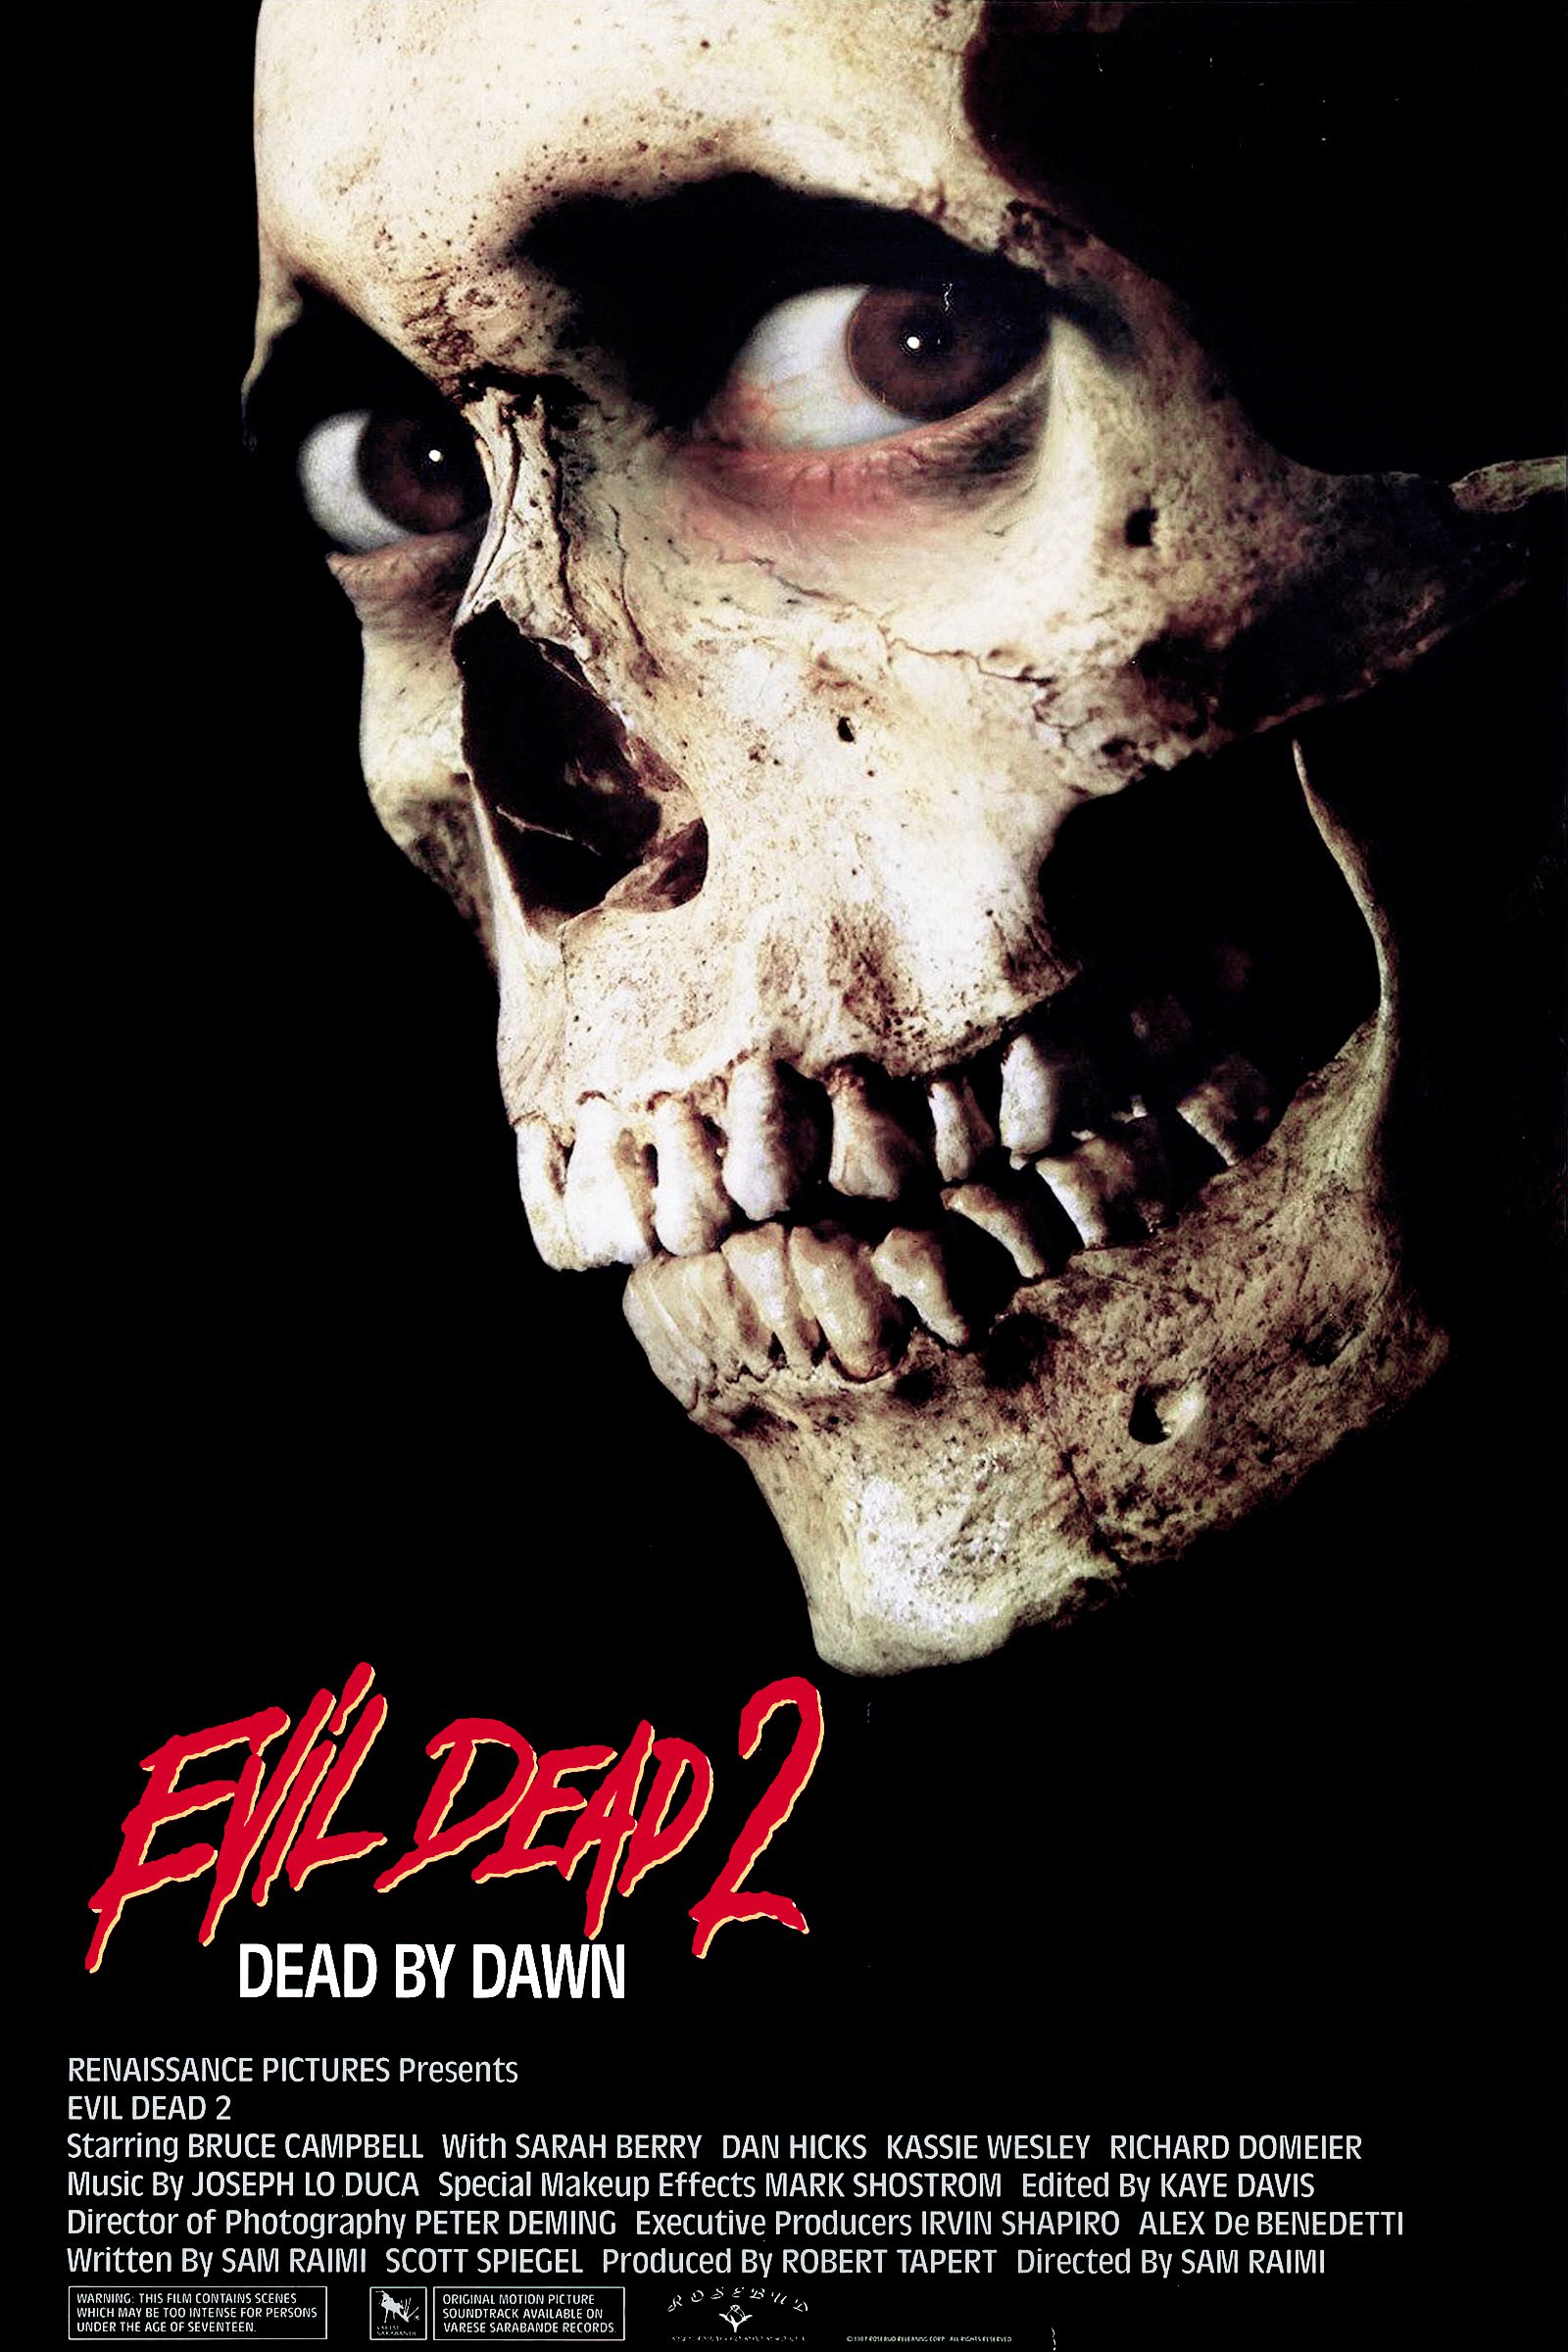 Poster for the movie "Evil Dead II"